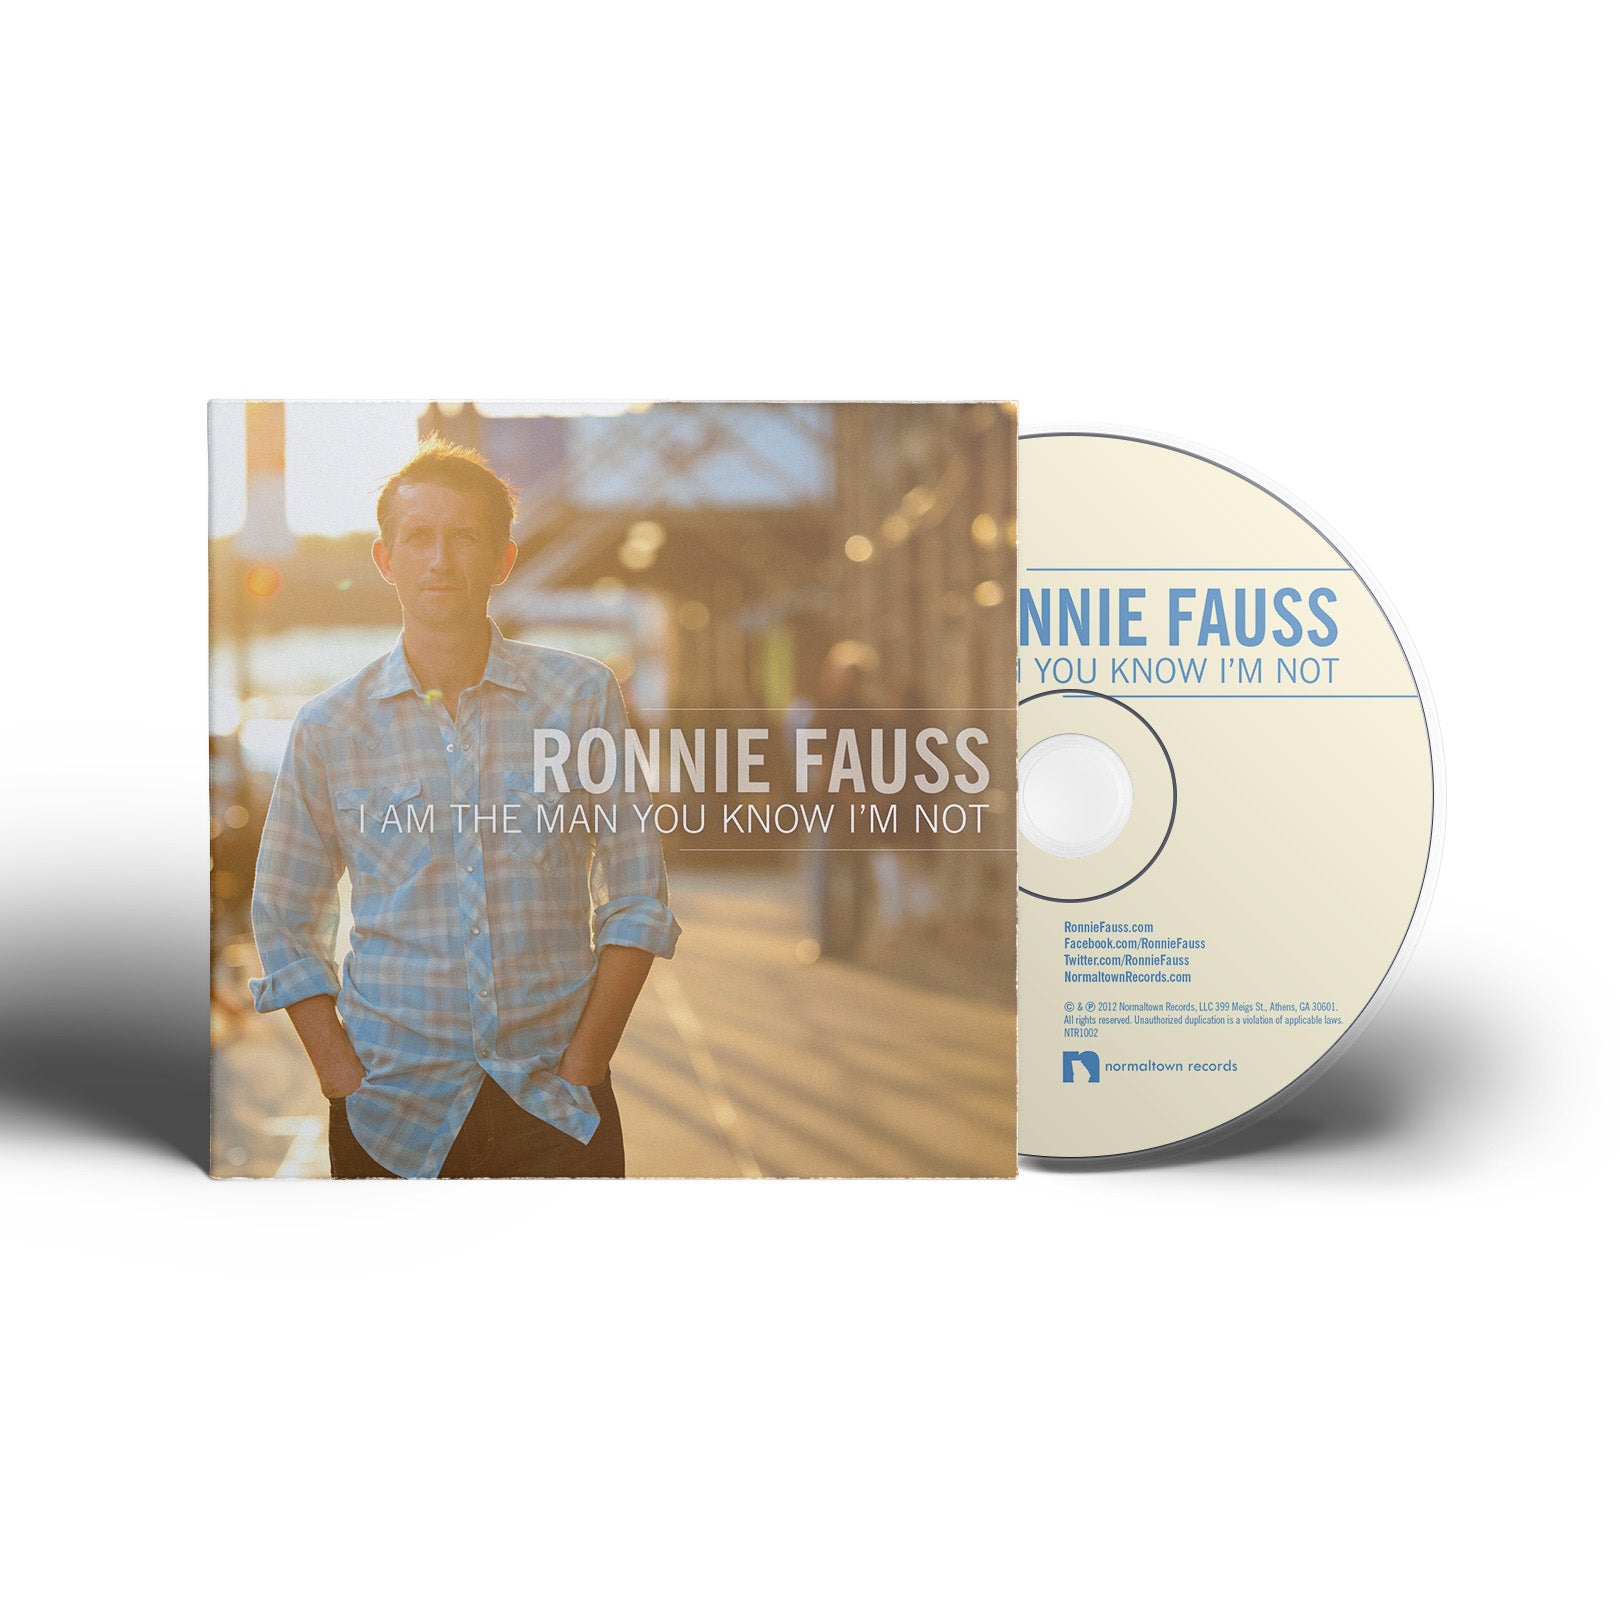 Ronnie Fauss - I Am The Man You Know I’m Not [CD]